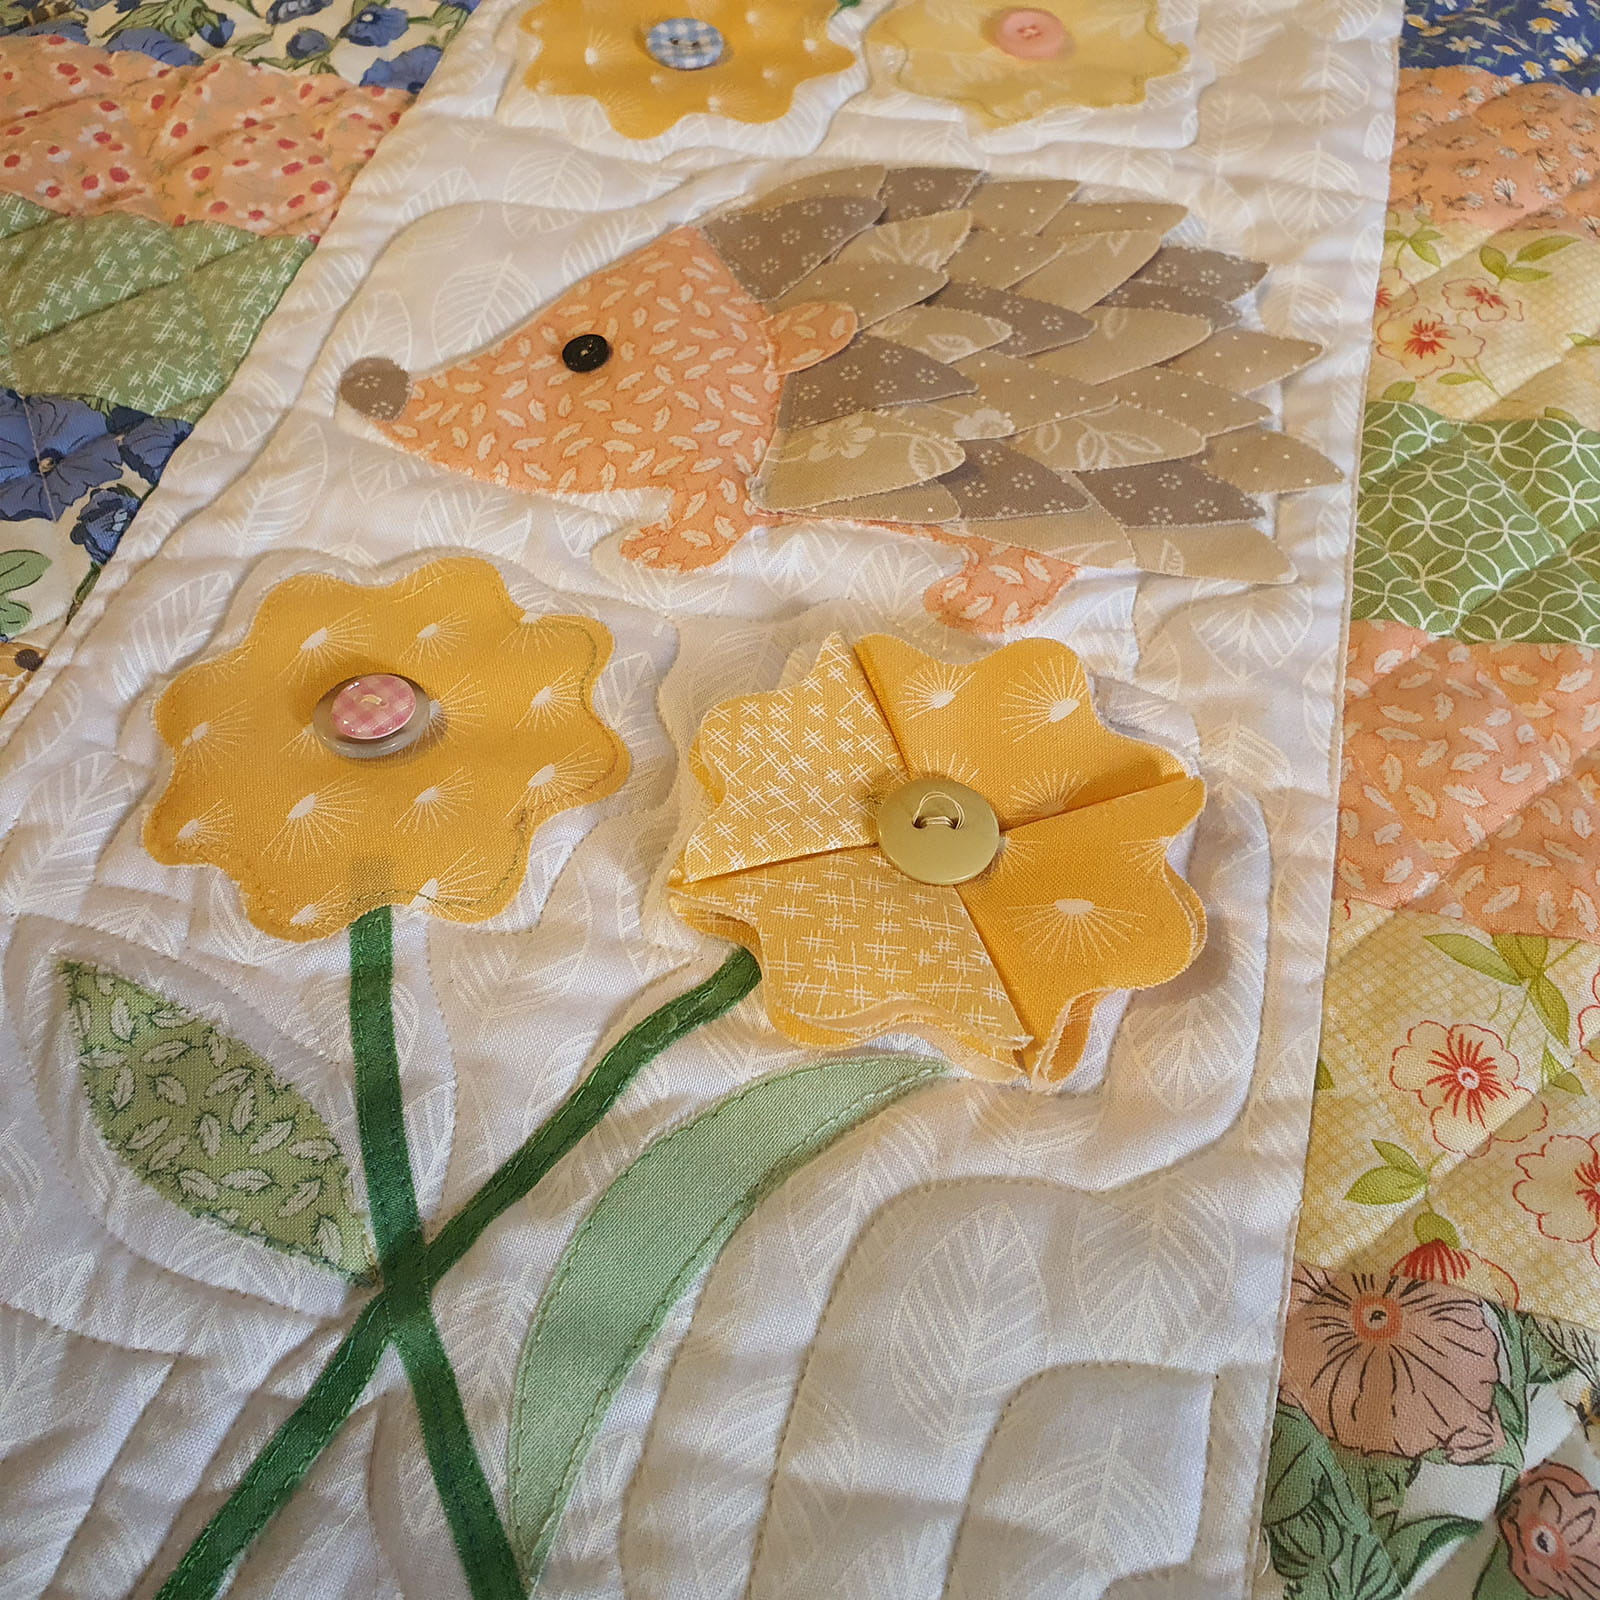 3D fabric flower and hedgehog on quilt background